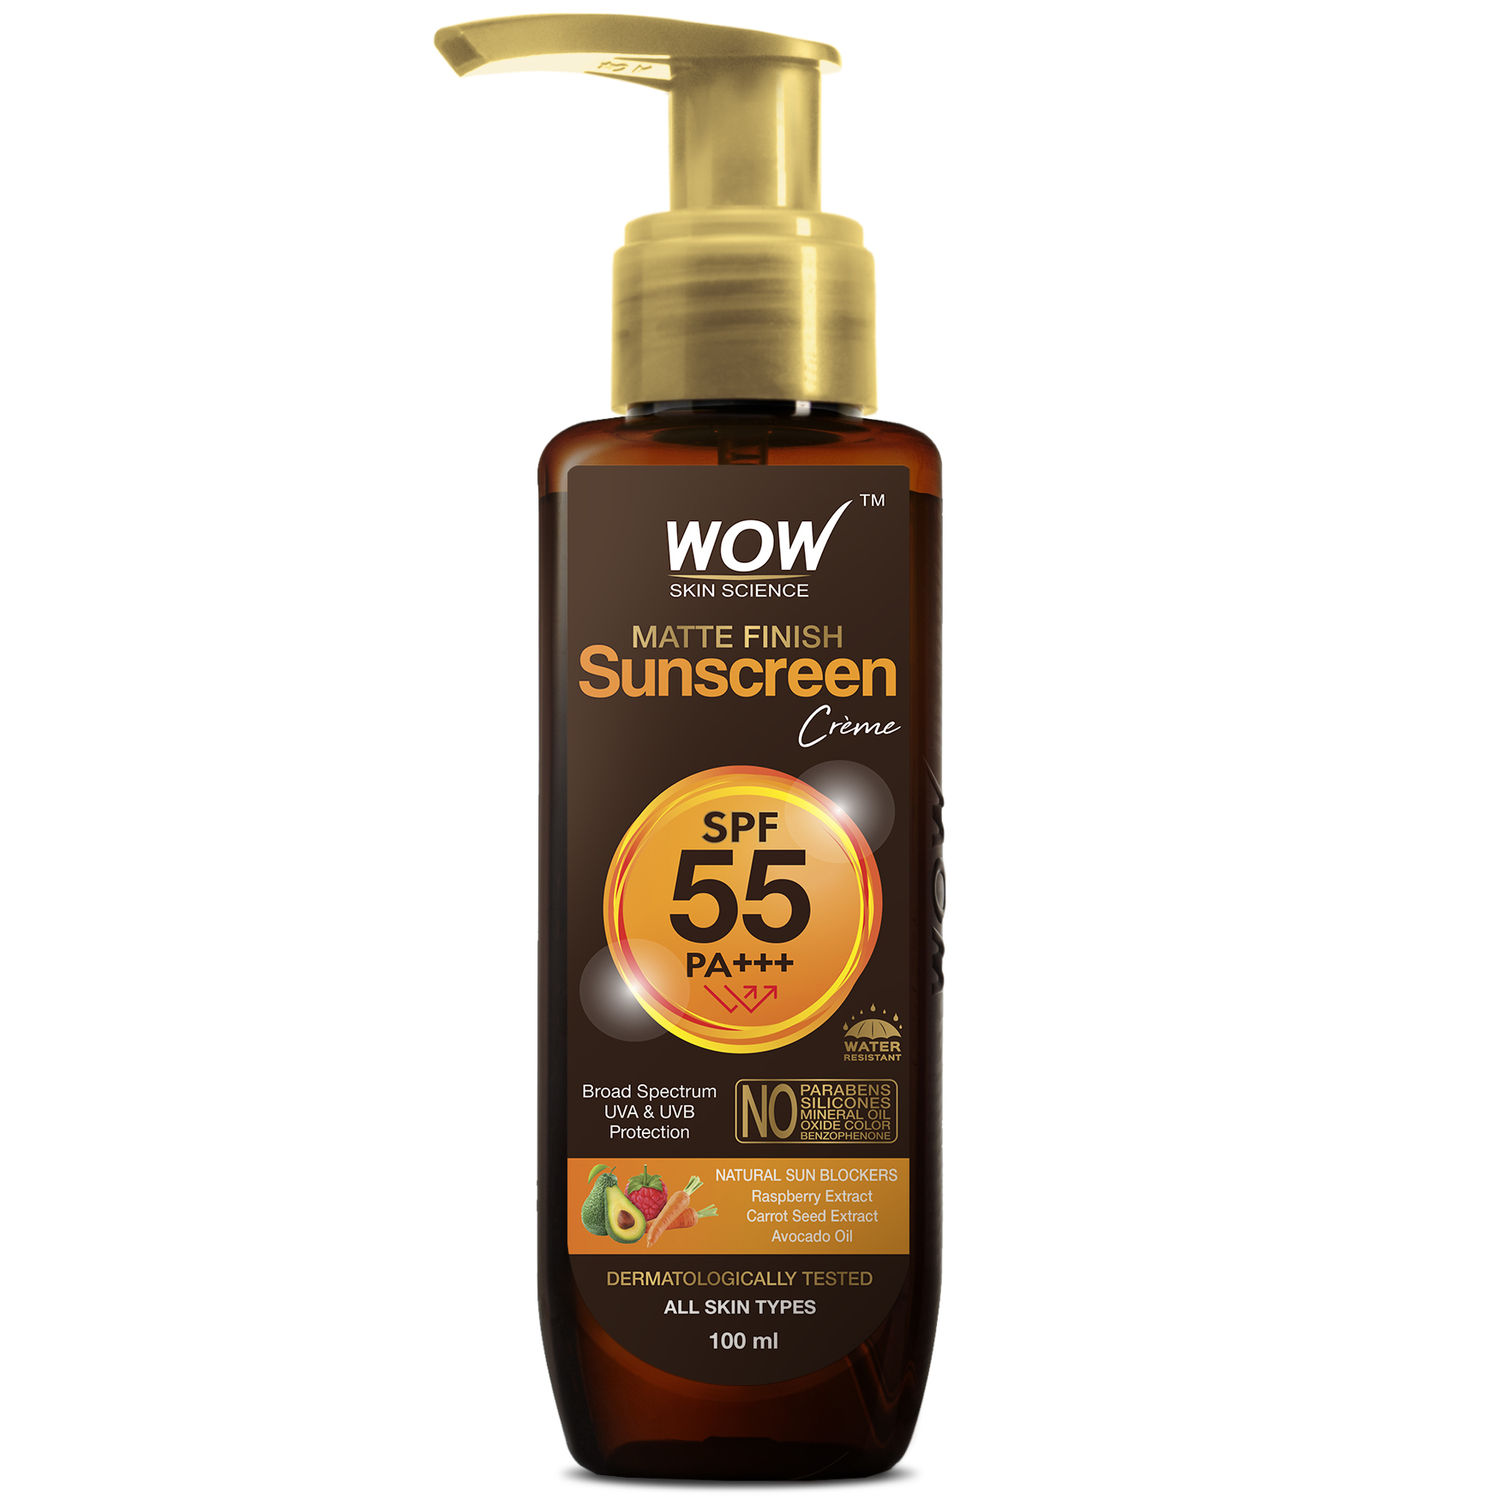 Buy WOW Skin Science Sunscreen Matte Finish - SPF 55 PA+++ - Very High Broad Spectrum - UVA &UVB Protection - Quick Absorb - No Parabens, Silicones, Mineral Oil, Oxide, Color & Benzophenone - 100mL - Purplle